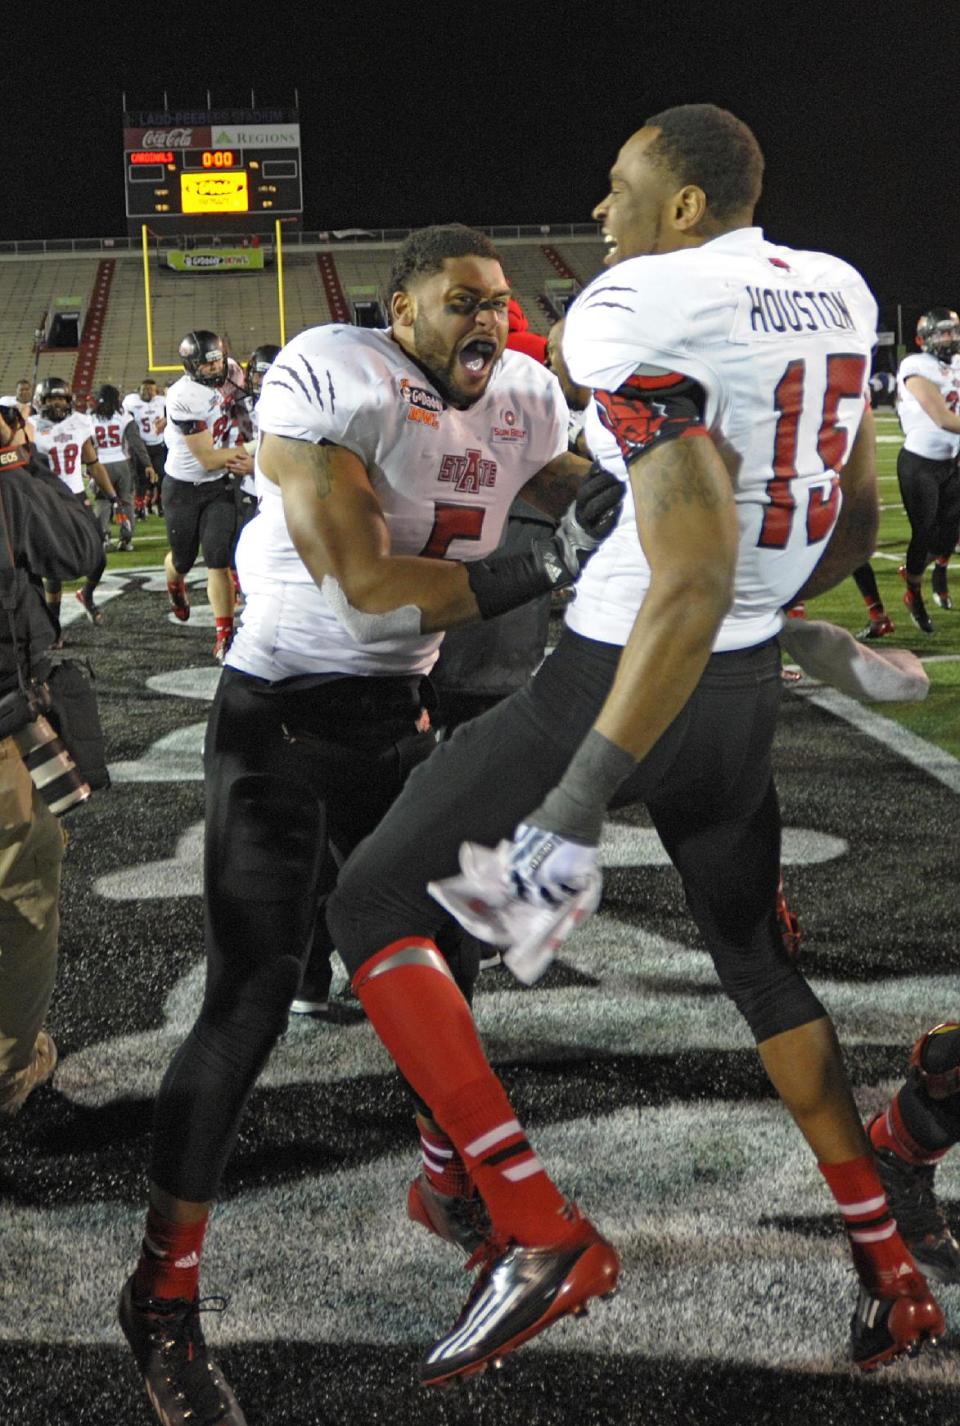 Arkansas State players Kyle Coleman (5) and Tres Houston (15) celebrate their teams victory over Ball State 23-20 in the GoDaddy Bowl NCAA college football game in Mobile, Ala., Sunday, Jan. 5, 2014. (AP Photo/G.M. Andrews)